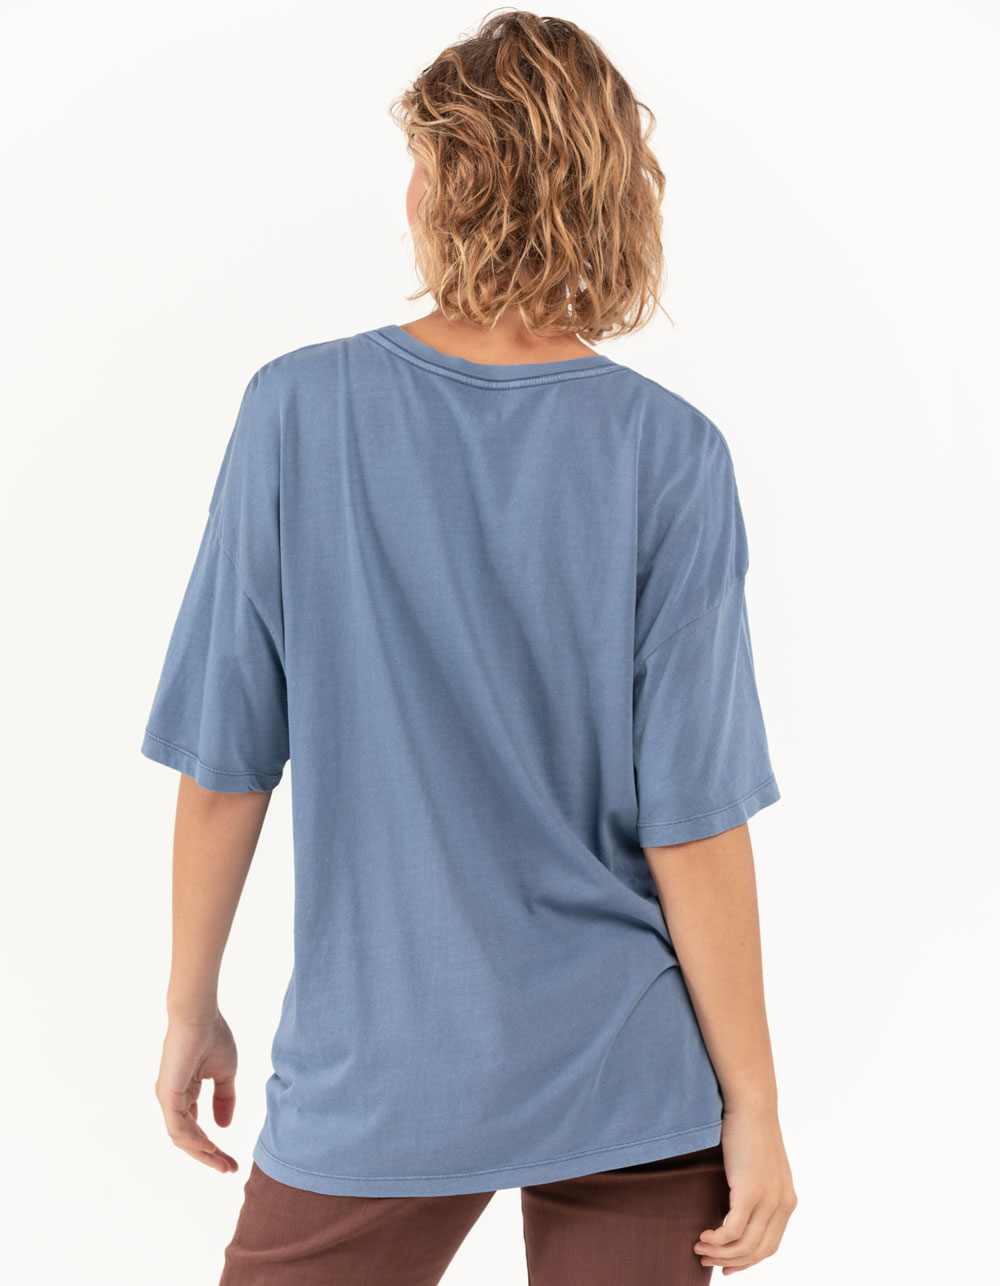 ROXY Phased Out Womens Oversized Tee - BLUE | Tillys